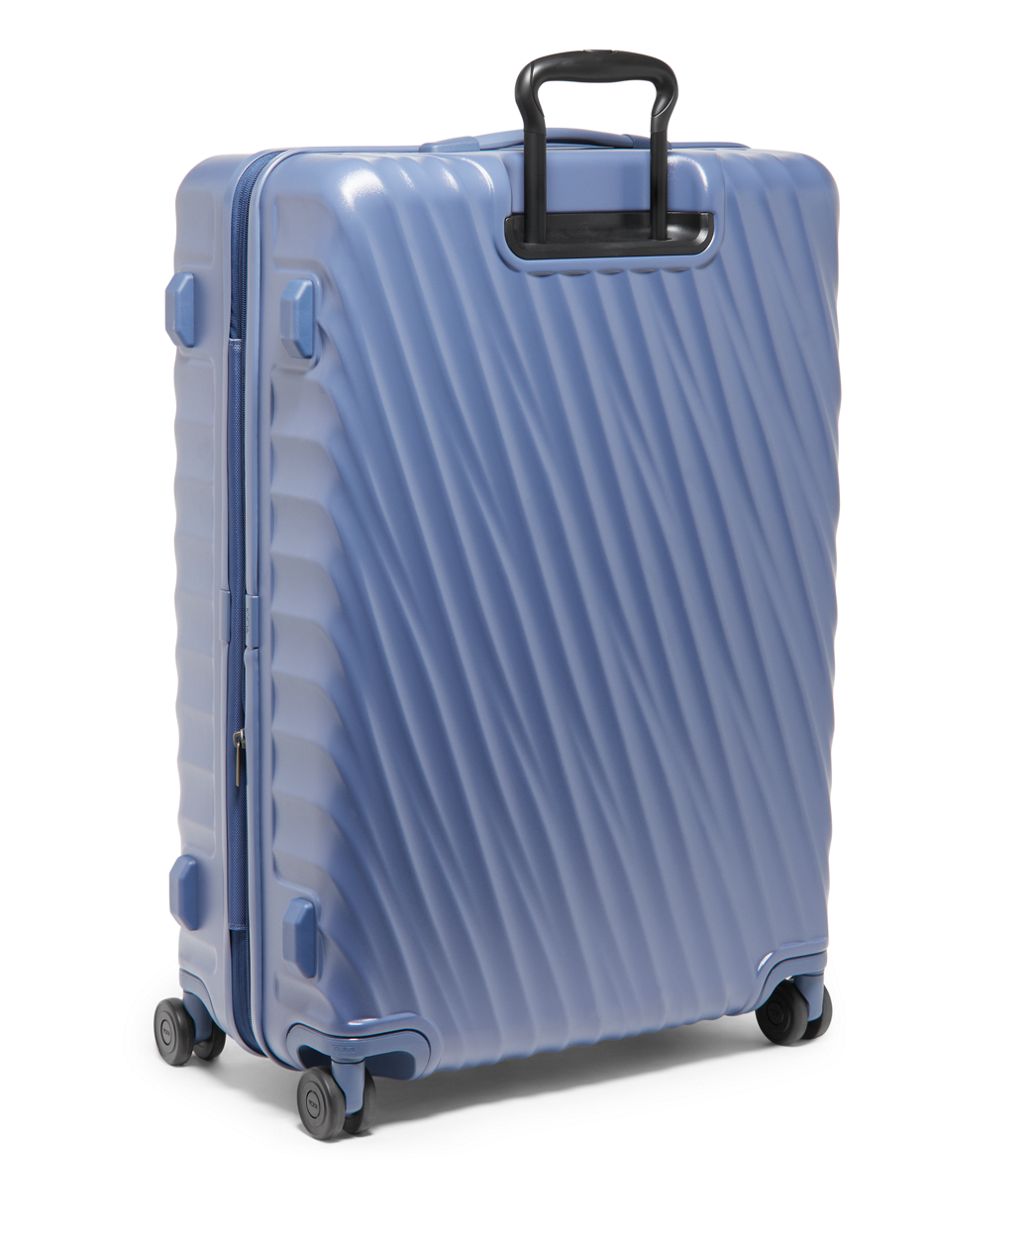 Tumi 19 Degree Extended Trip Expandable 4 Wheeled Packing Case Slate Blue Texture